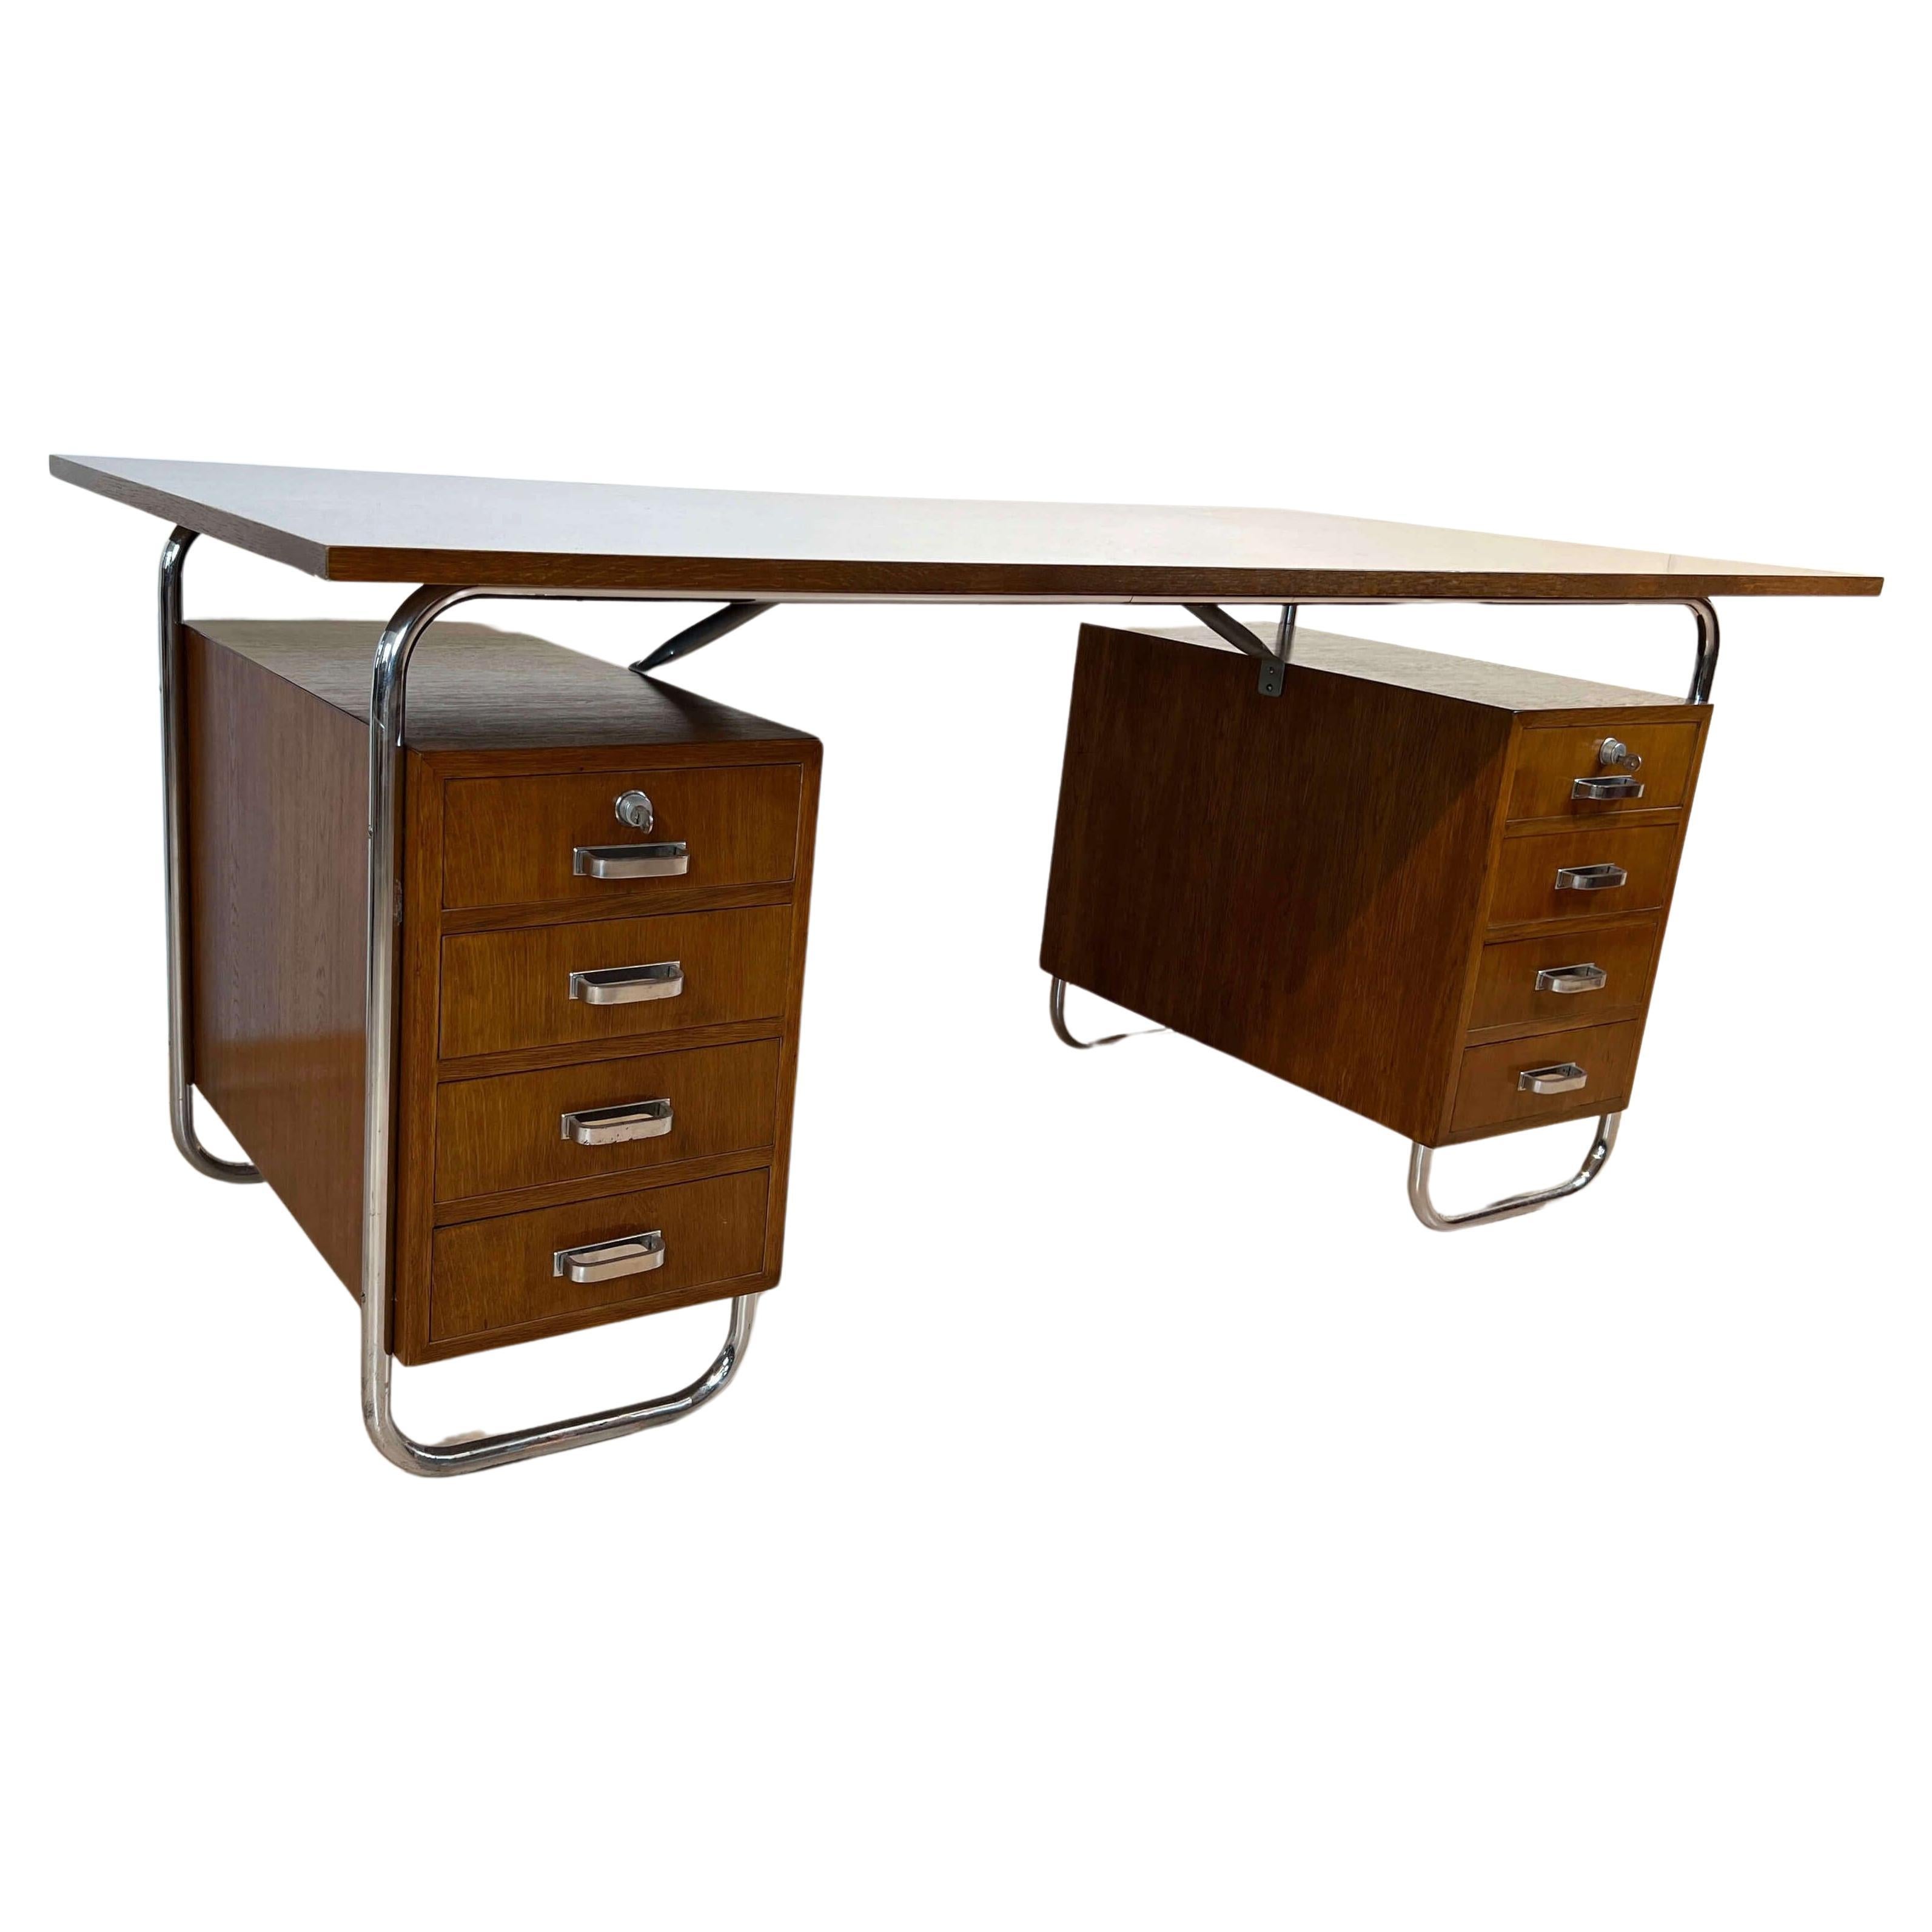 Beautiful, large modernist / Bauhaus Steeltube Desk by Mücke-Melder, Czech circa 1935.
Oak solid wood and veneer. Chrome-plated, polished tubular steel frame with original patina. Left and right each 4 deep drawers, by locking the top drawer all 4